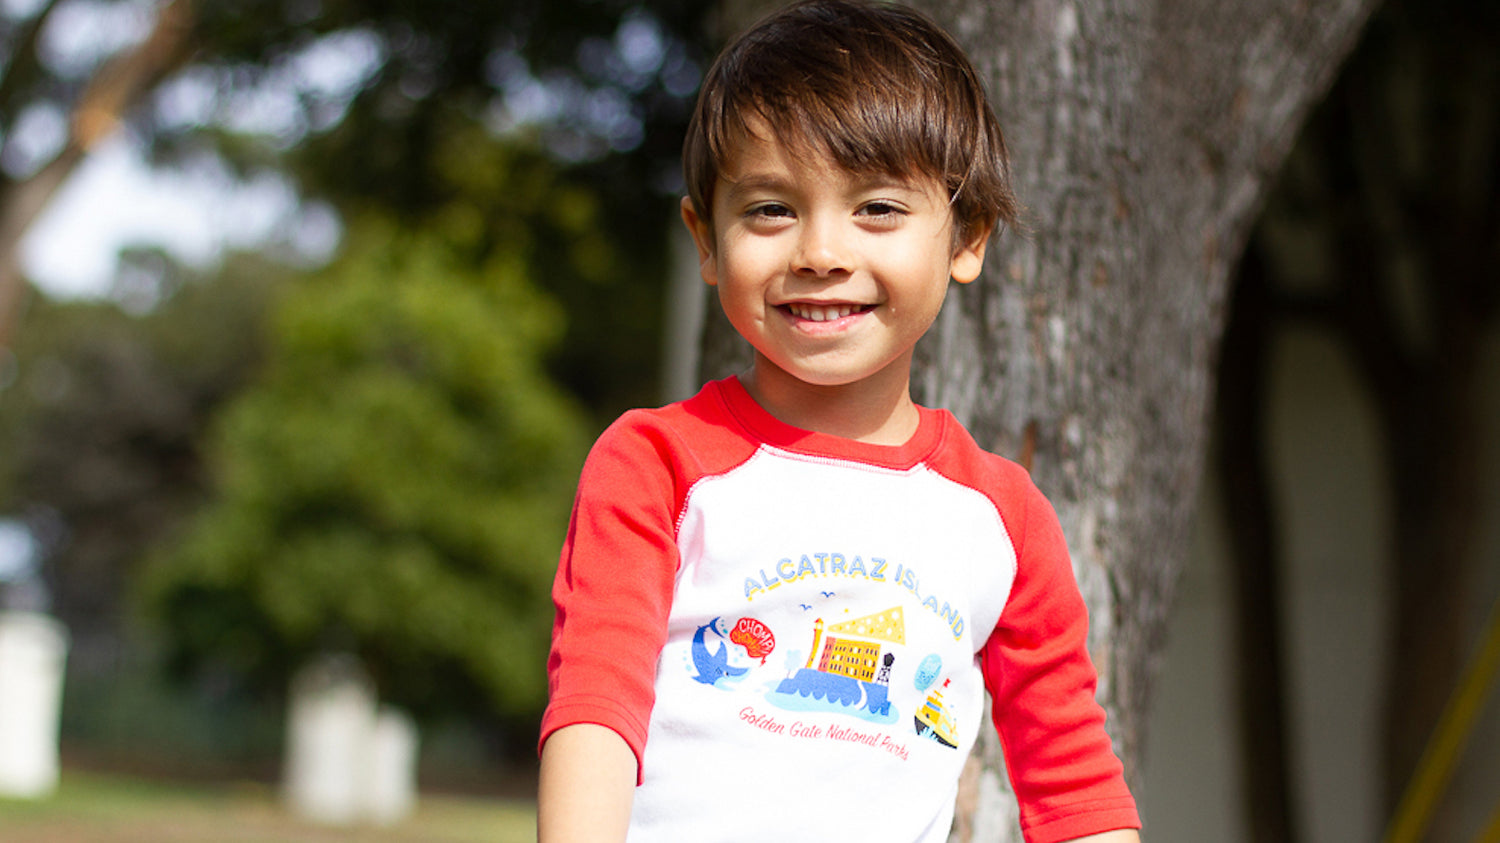 Smiling boy stands in a park looking at the camera. He wears a bright red and white 3/4 raglan sleeve t-shirt, with a colorful Alcatraz Island illustration on the chest.